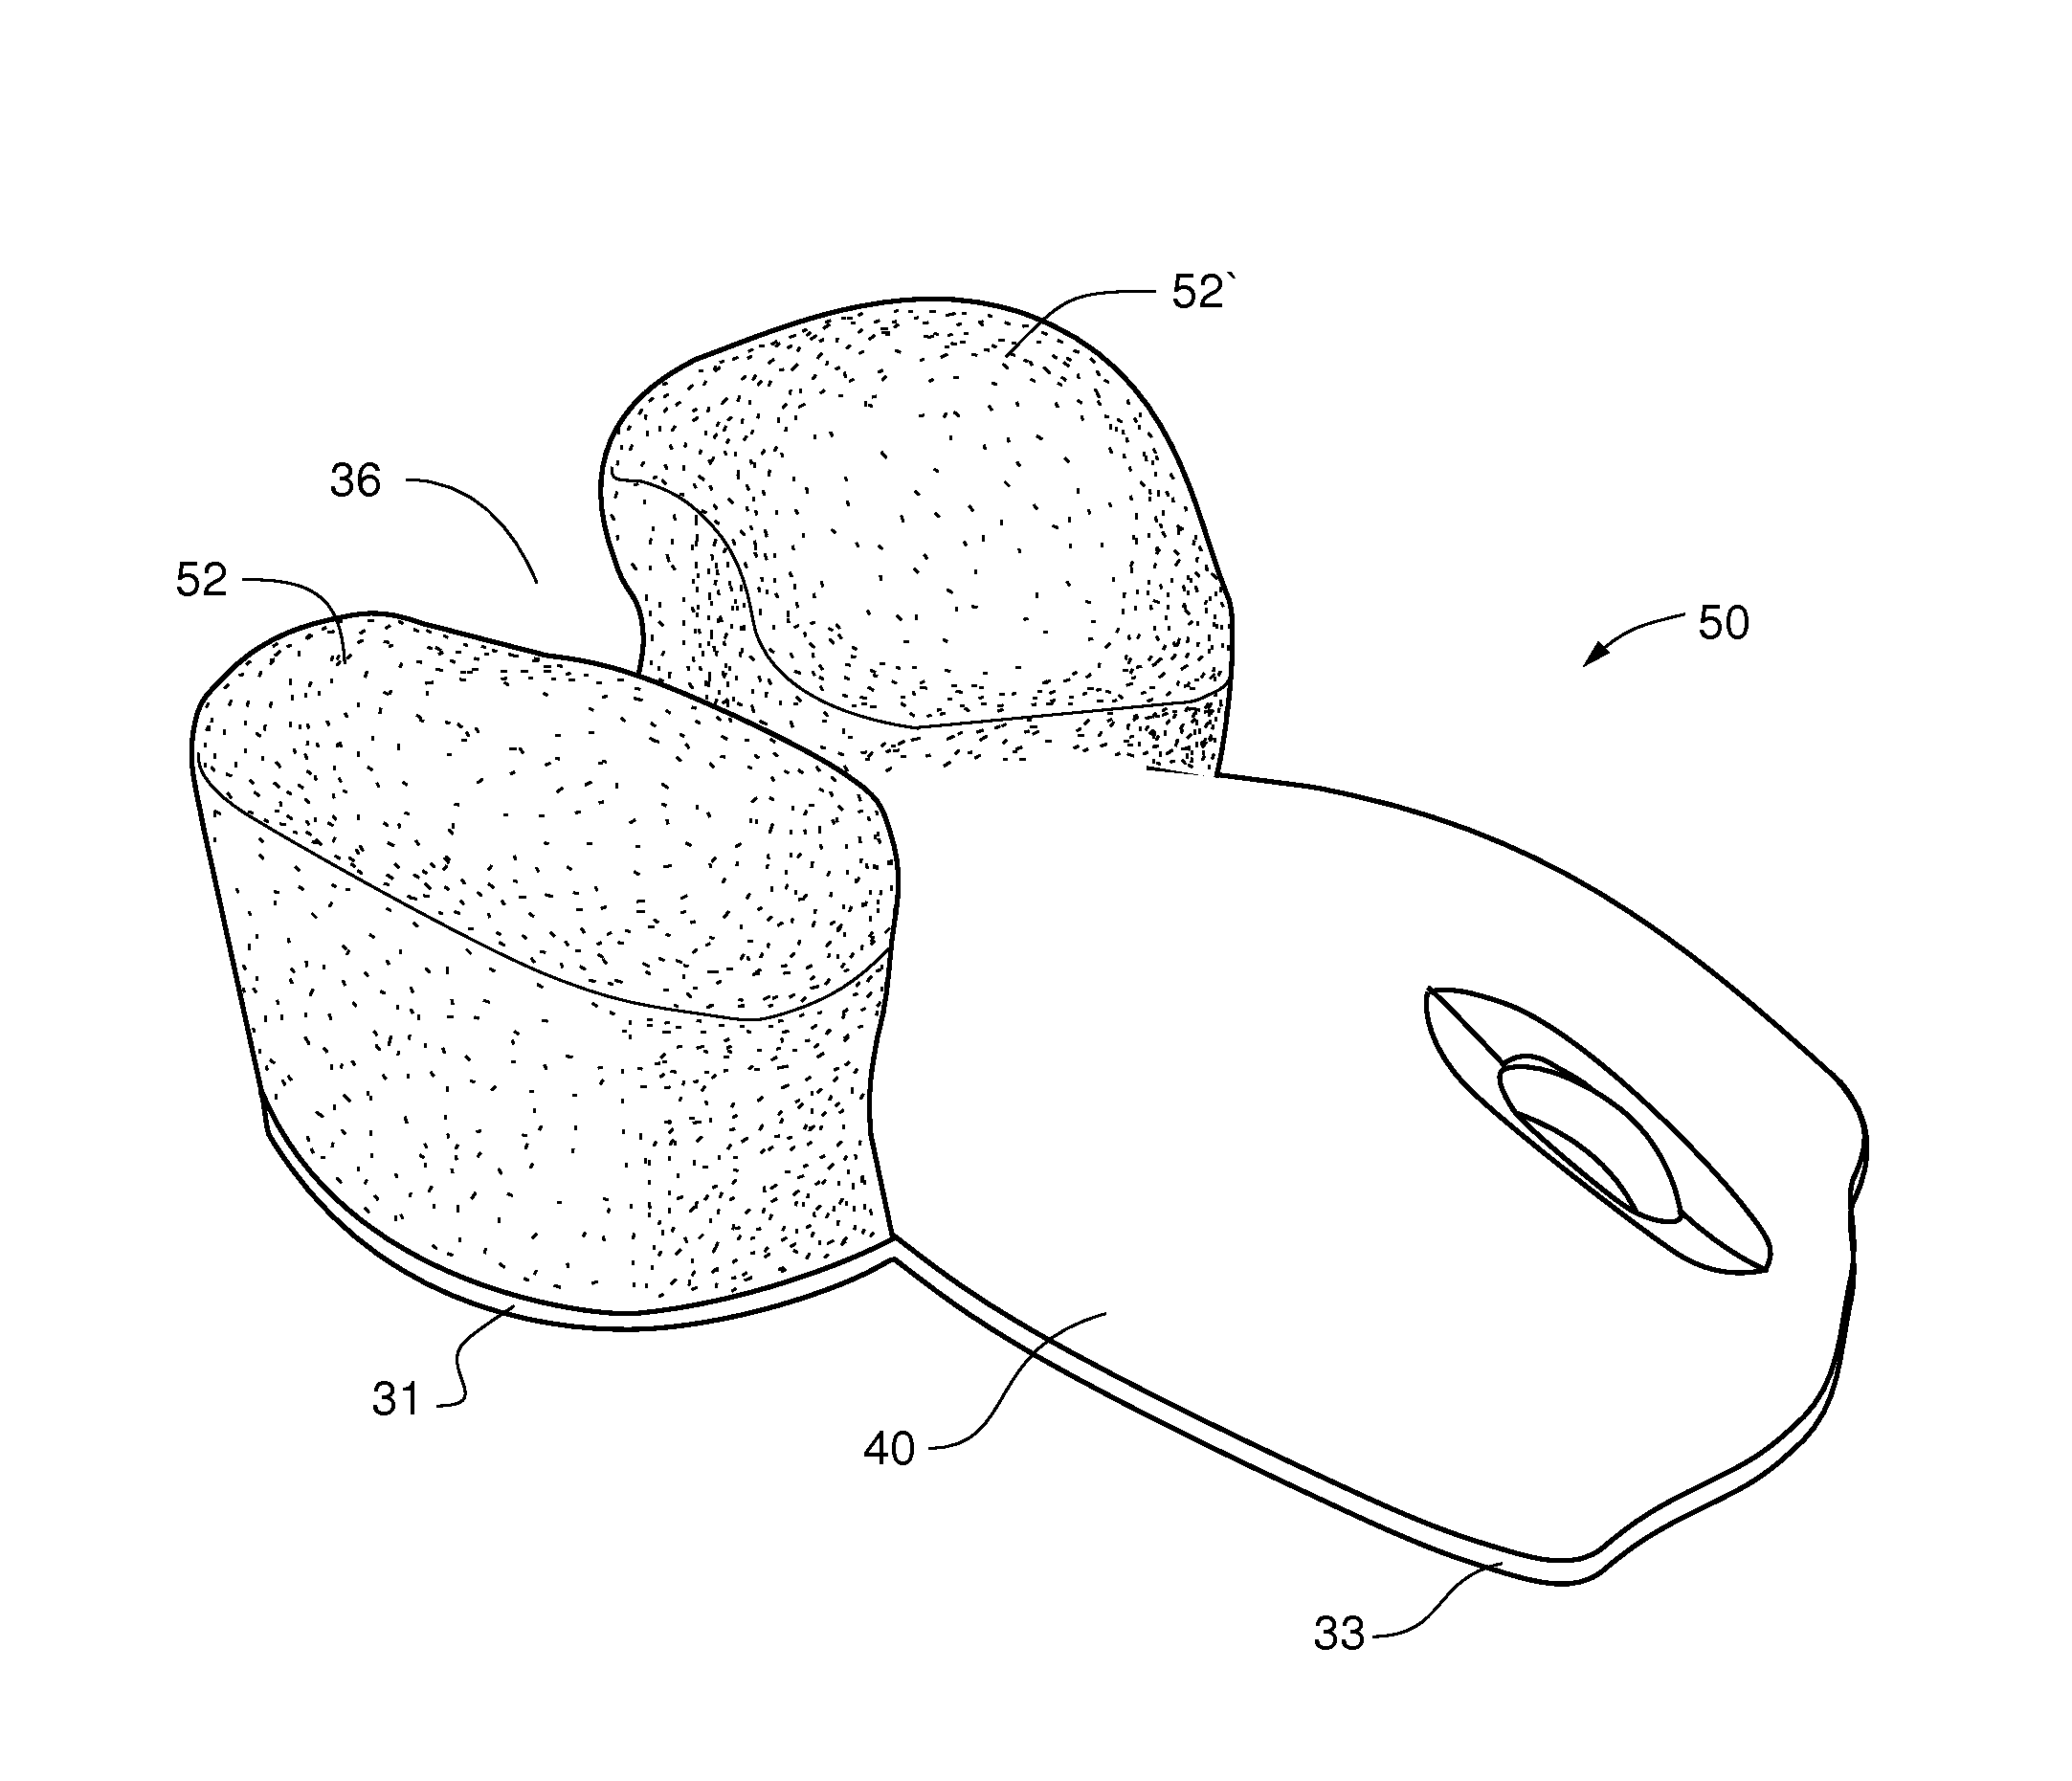 Computer mouse that prevents or treats carpal tunnel syndrome and methods of use